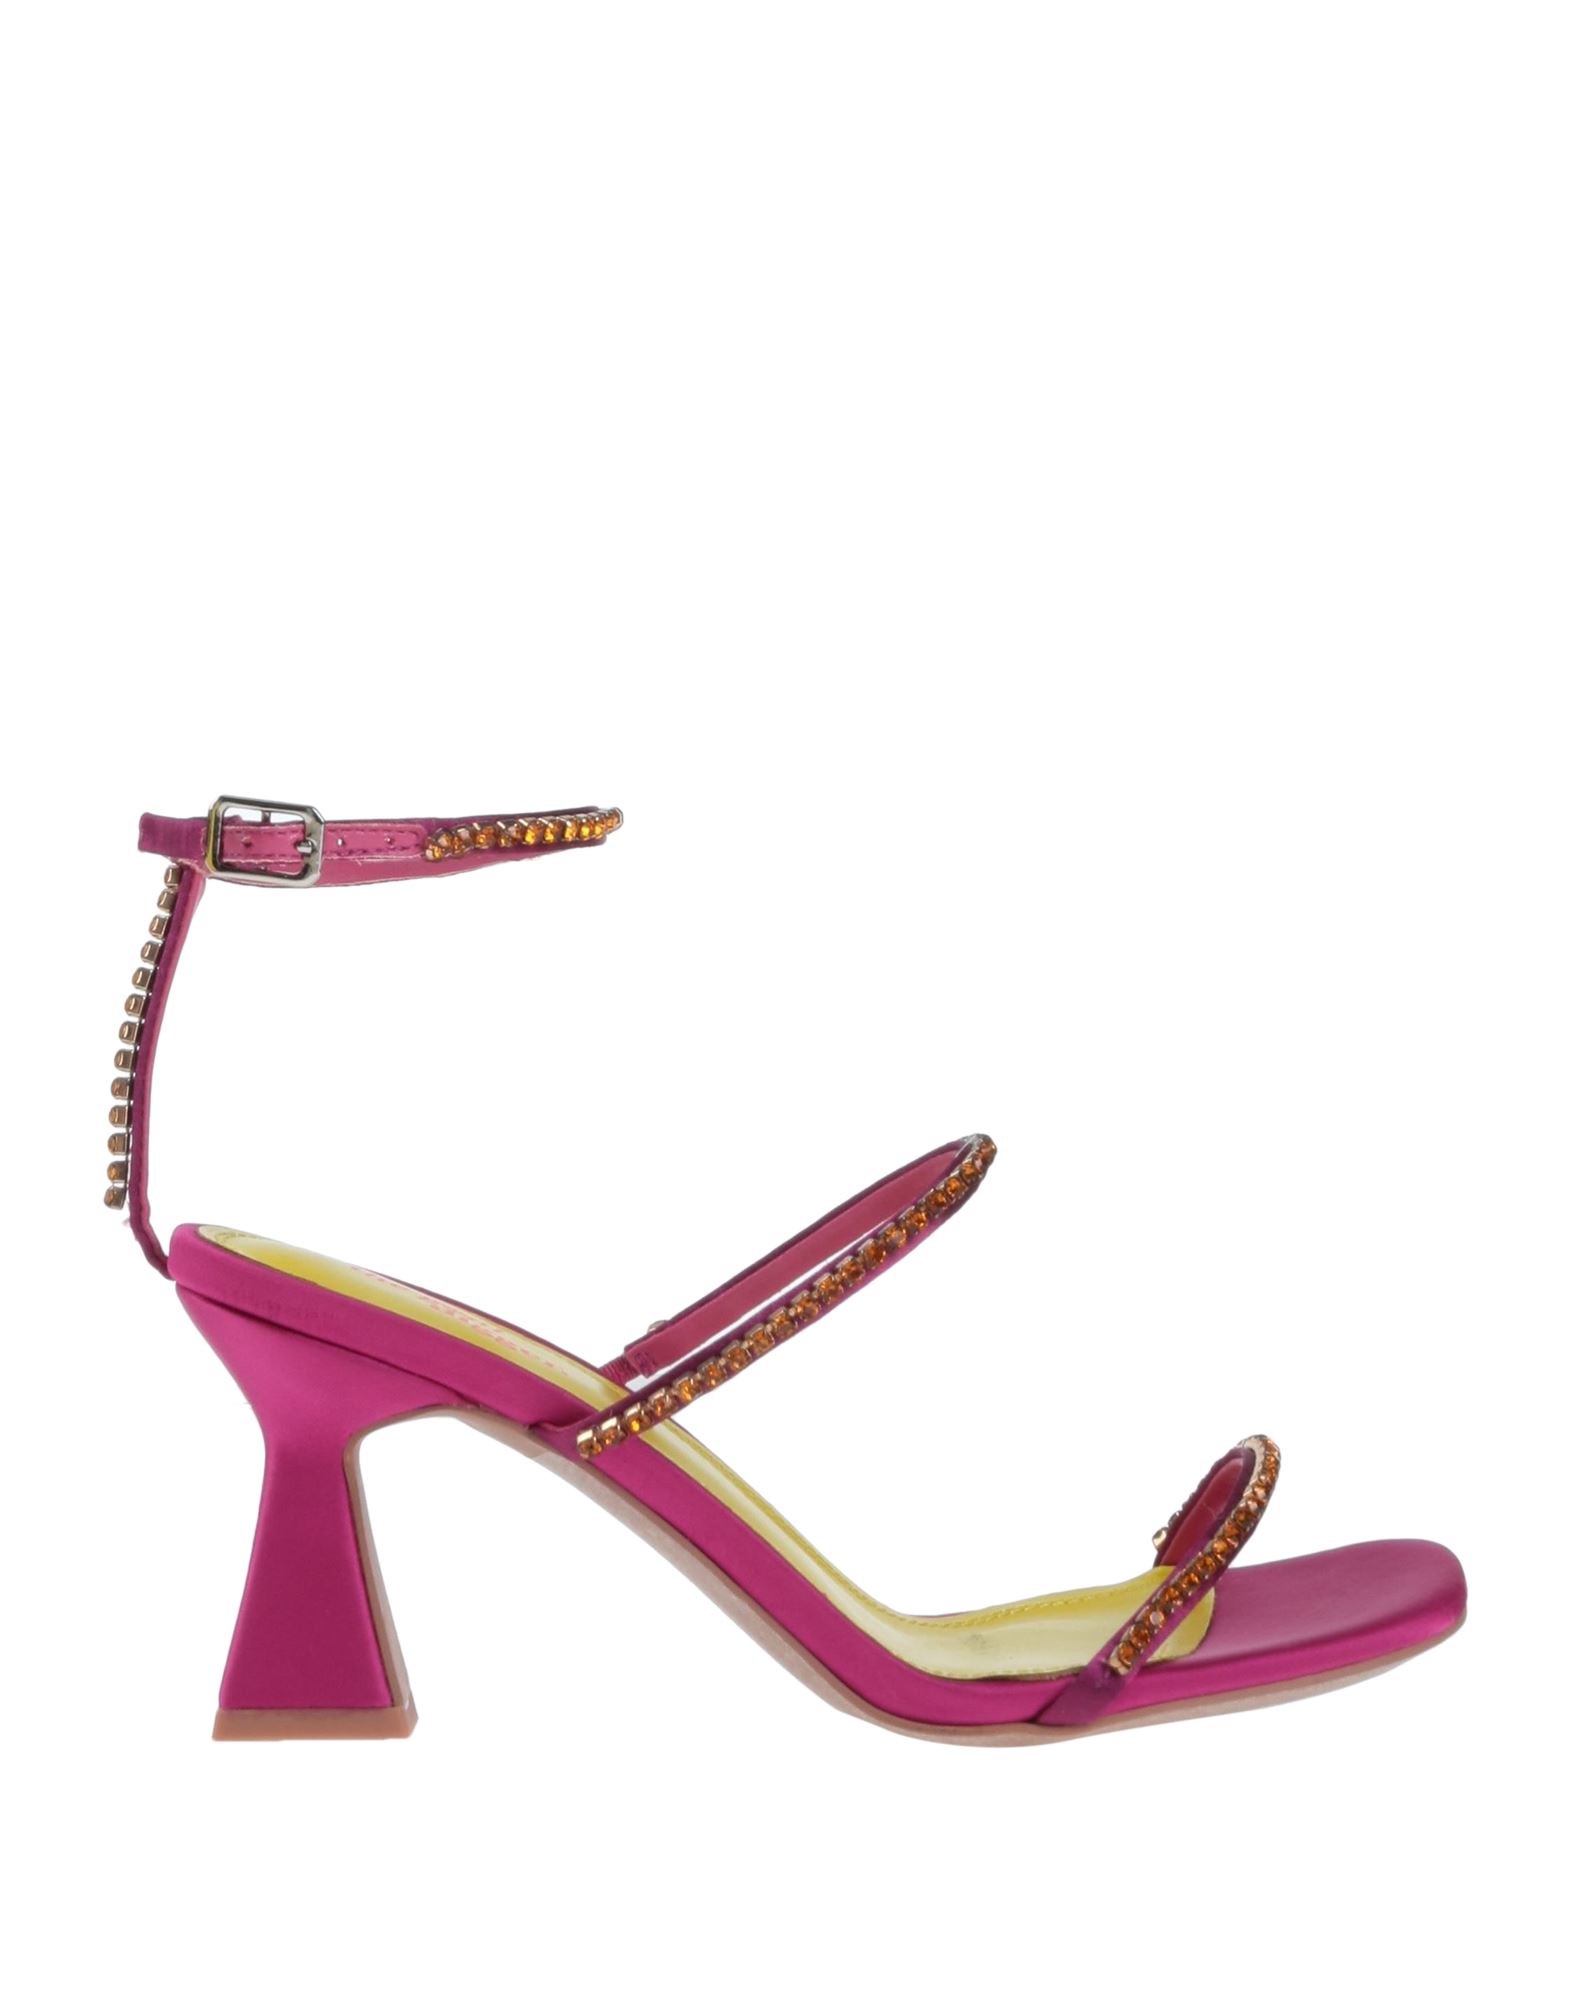 The Goal Digger Sandals In Pink